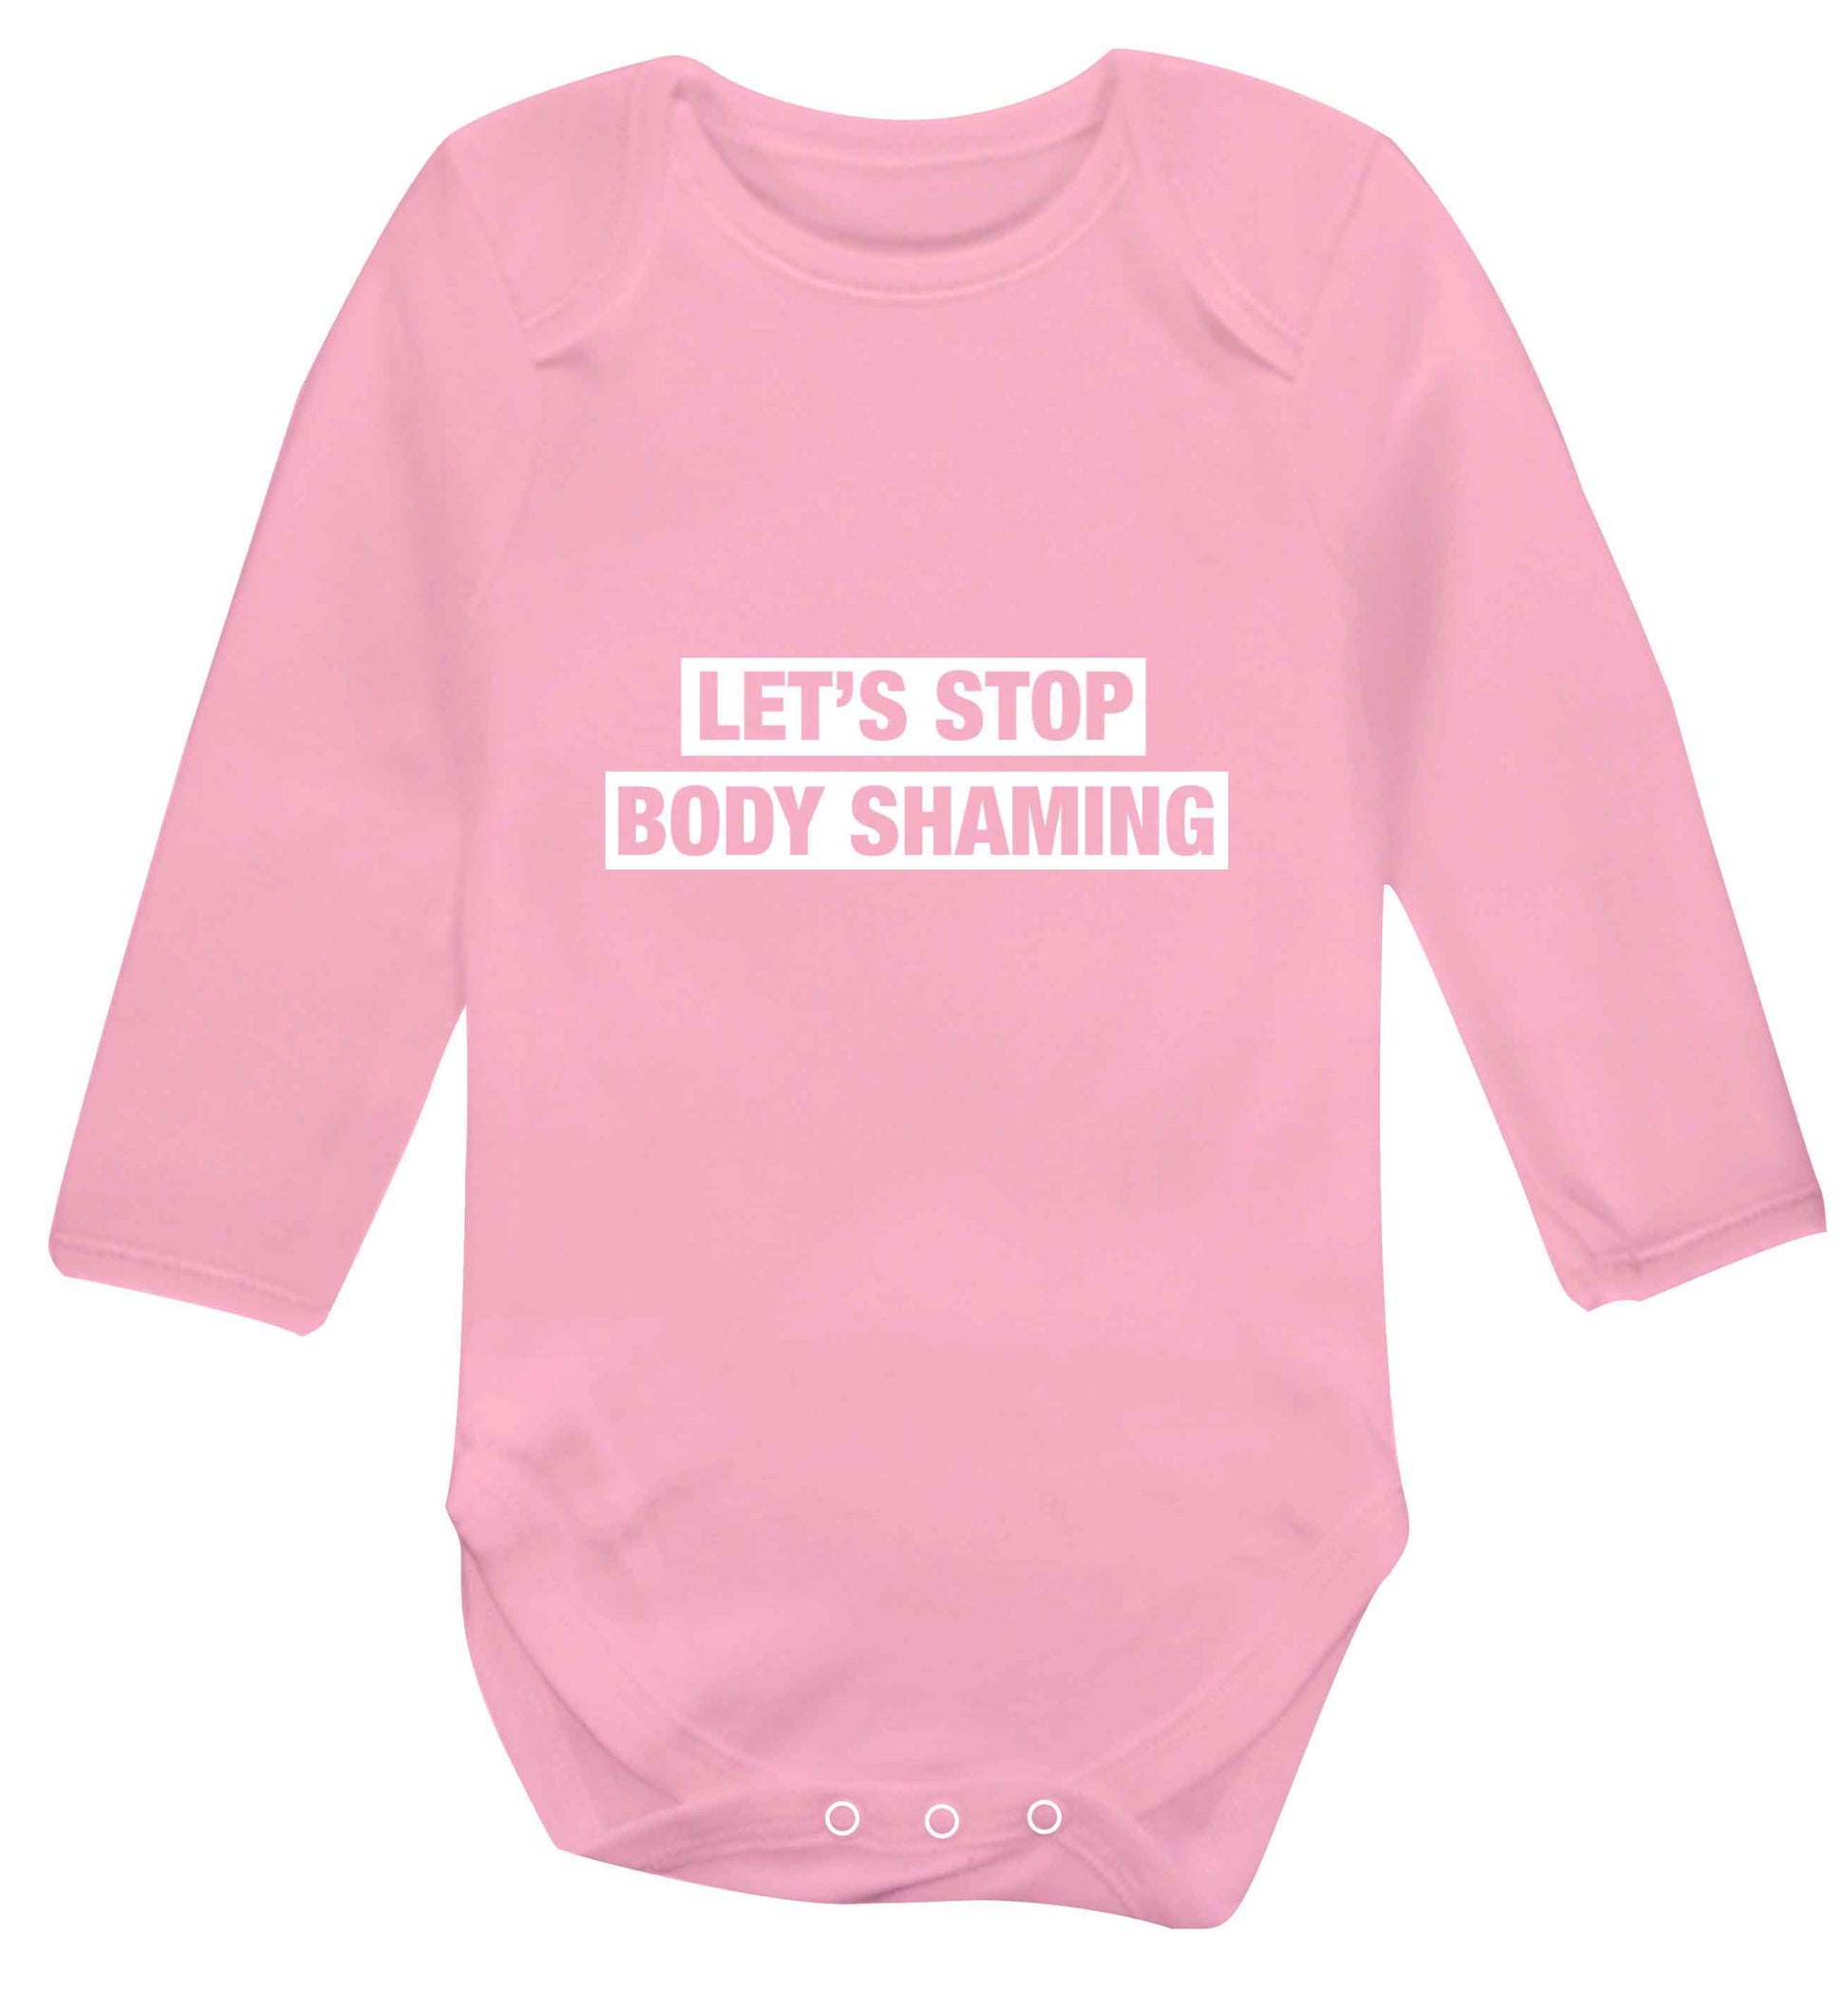 Let's stop body shaming baby vest long sleeved pale pink 6-12 months